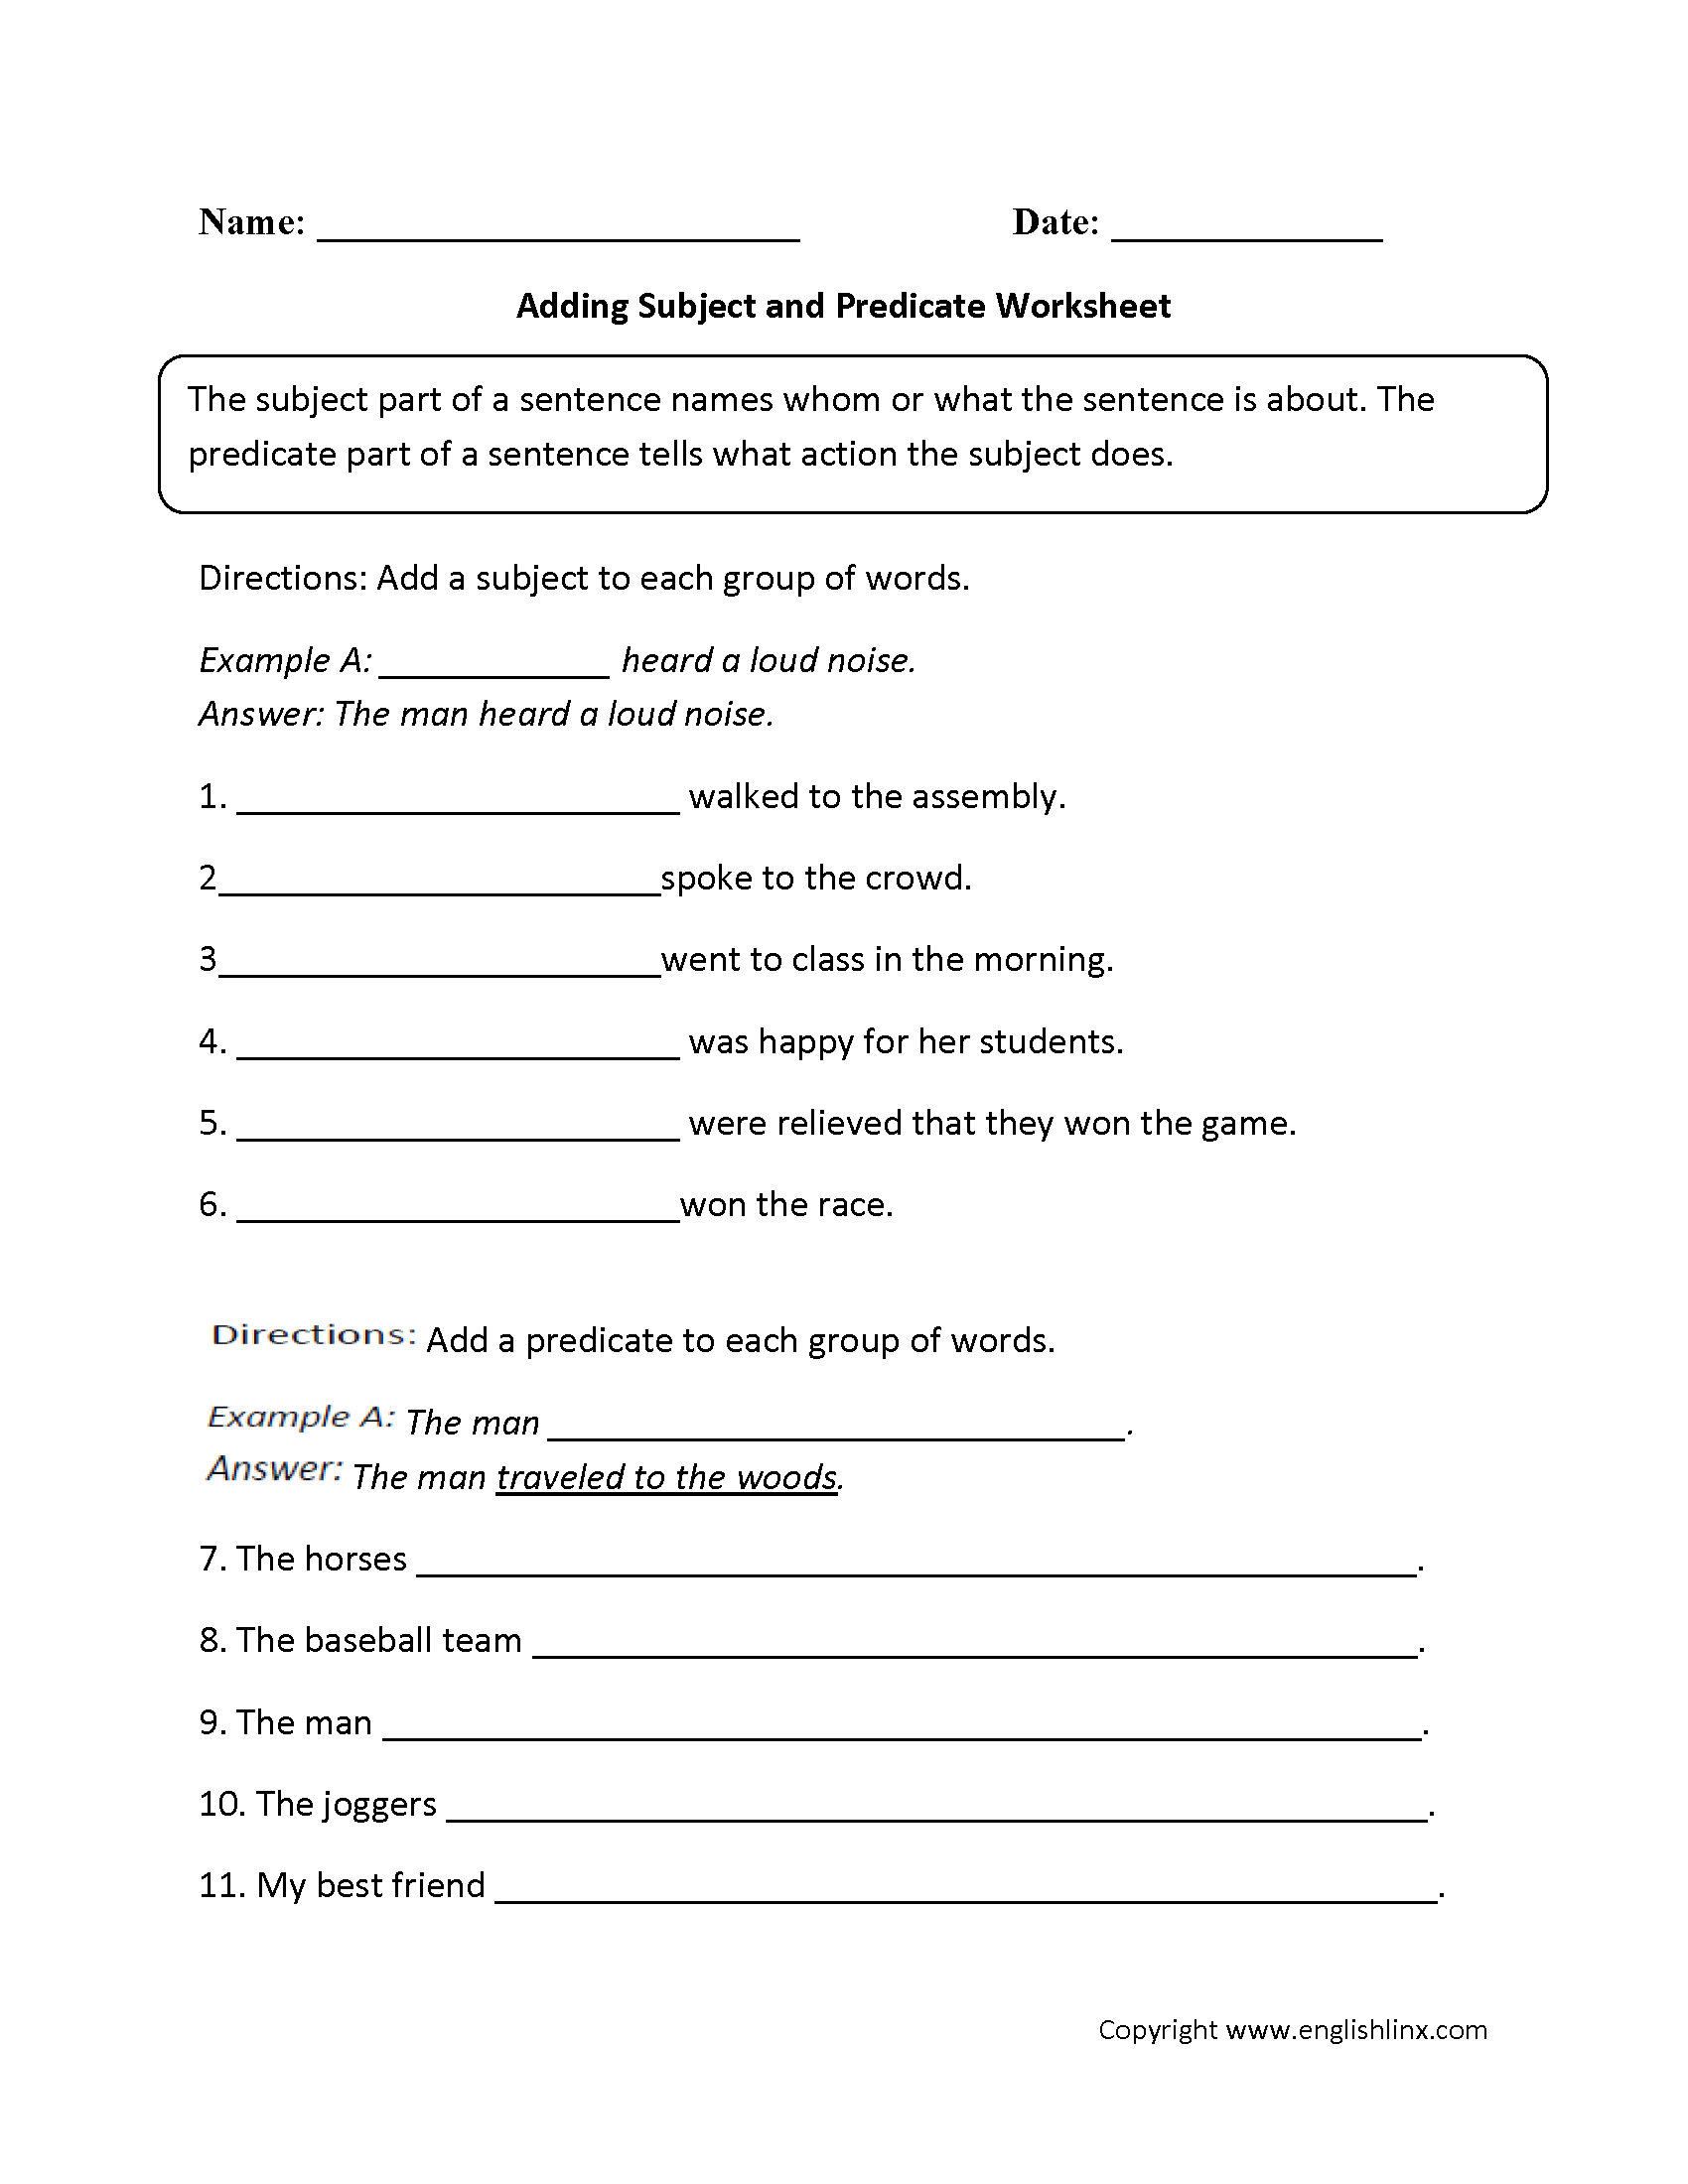 Adding Subject and Predicate Worksheet